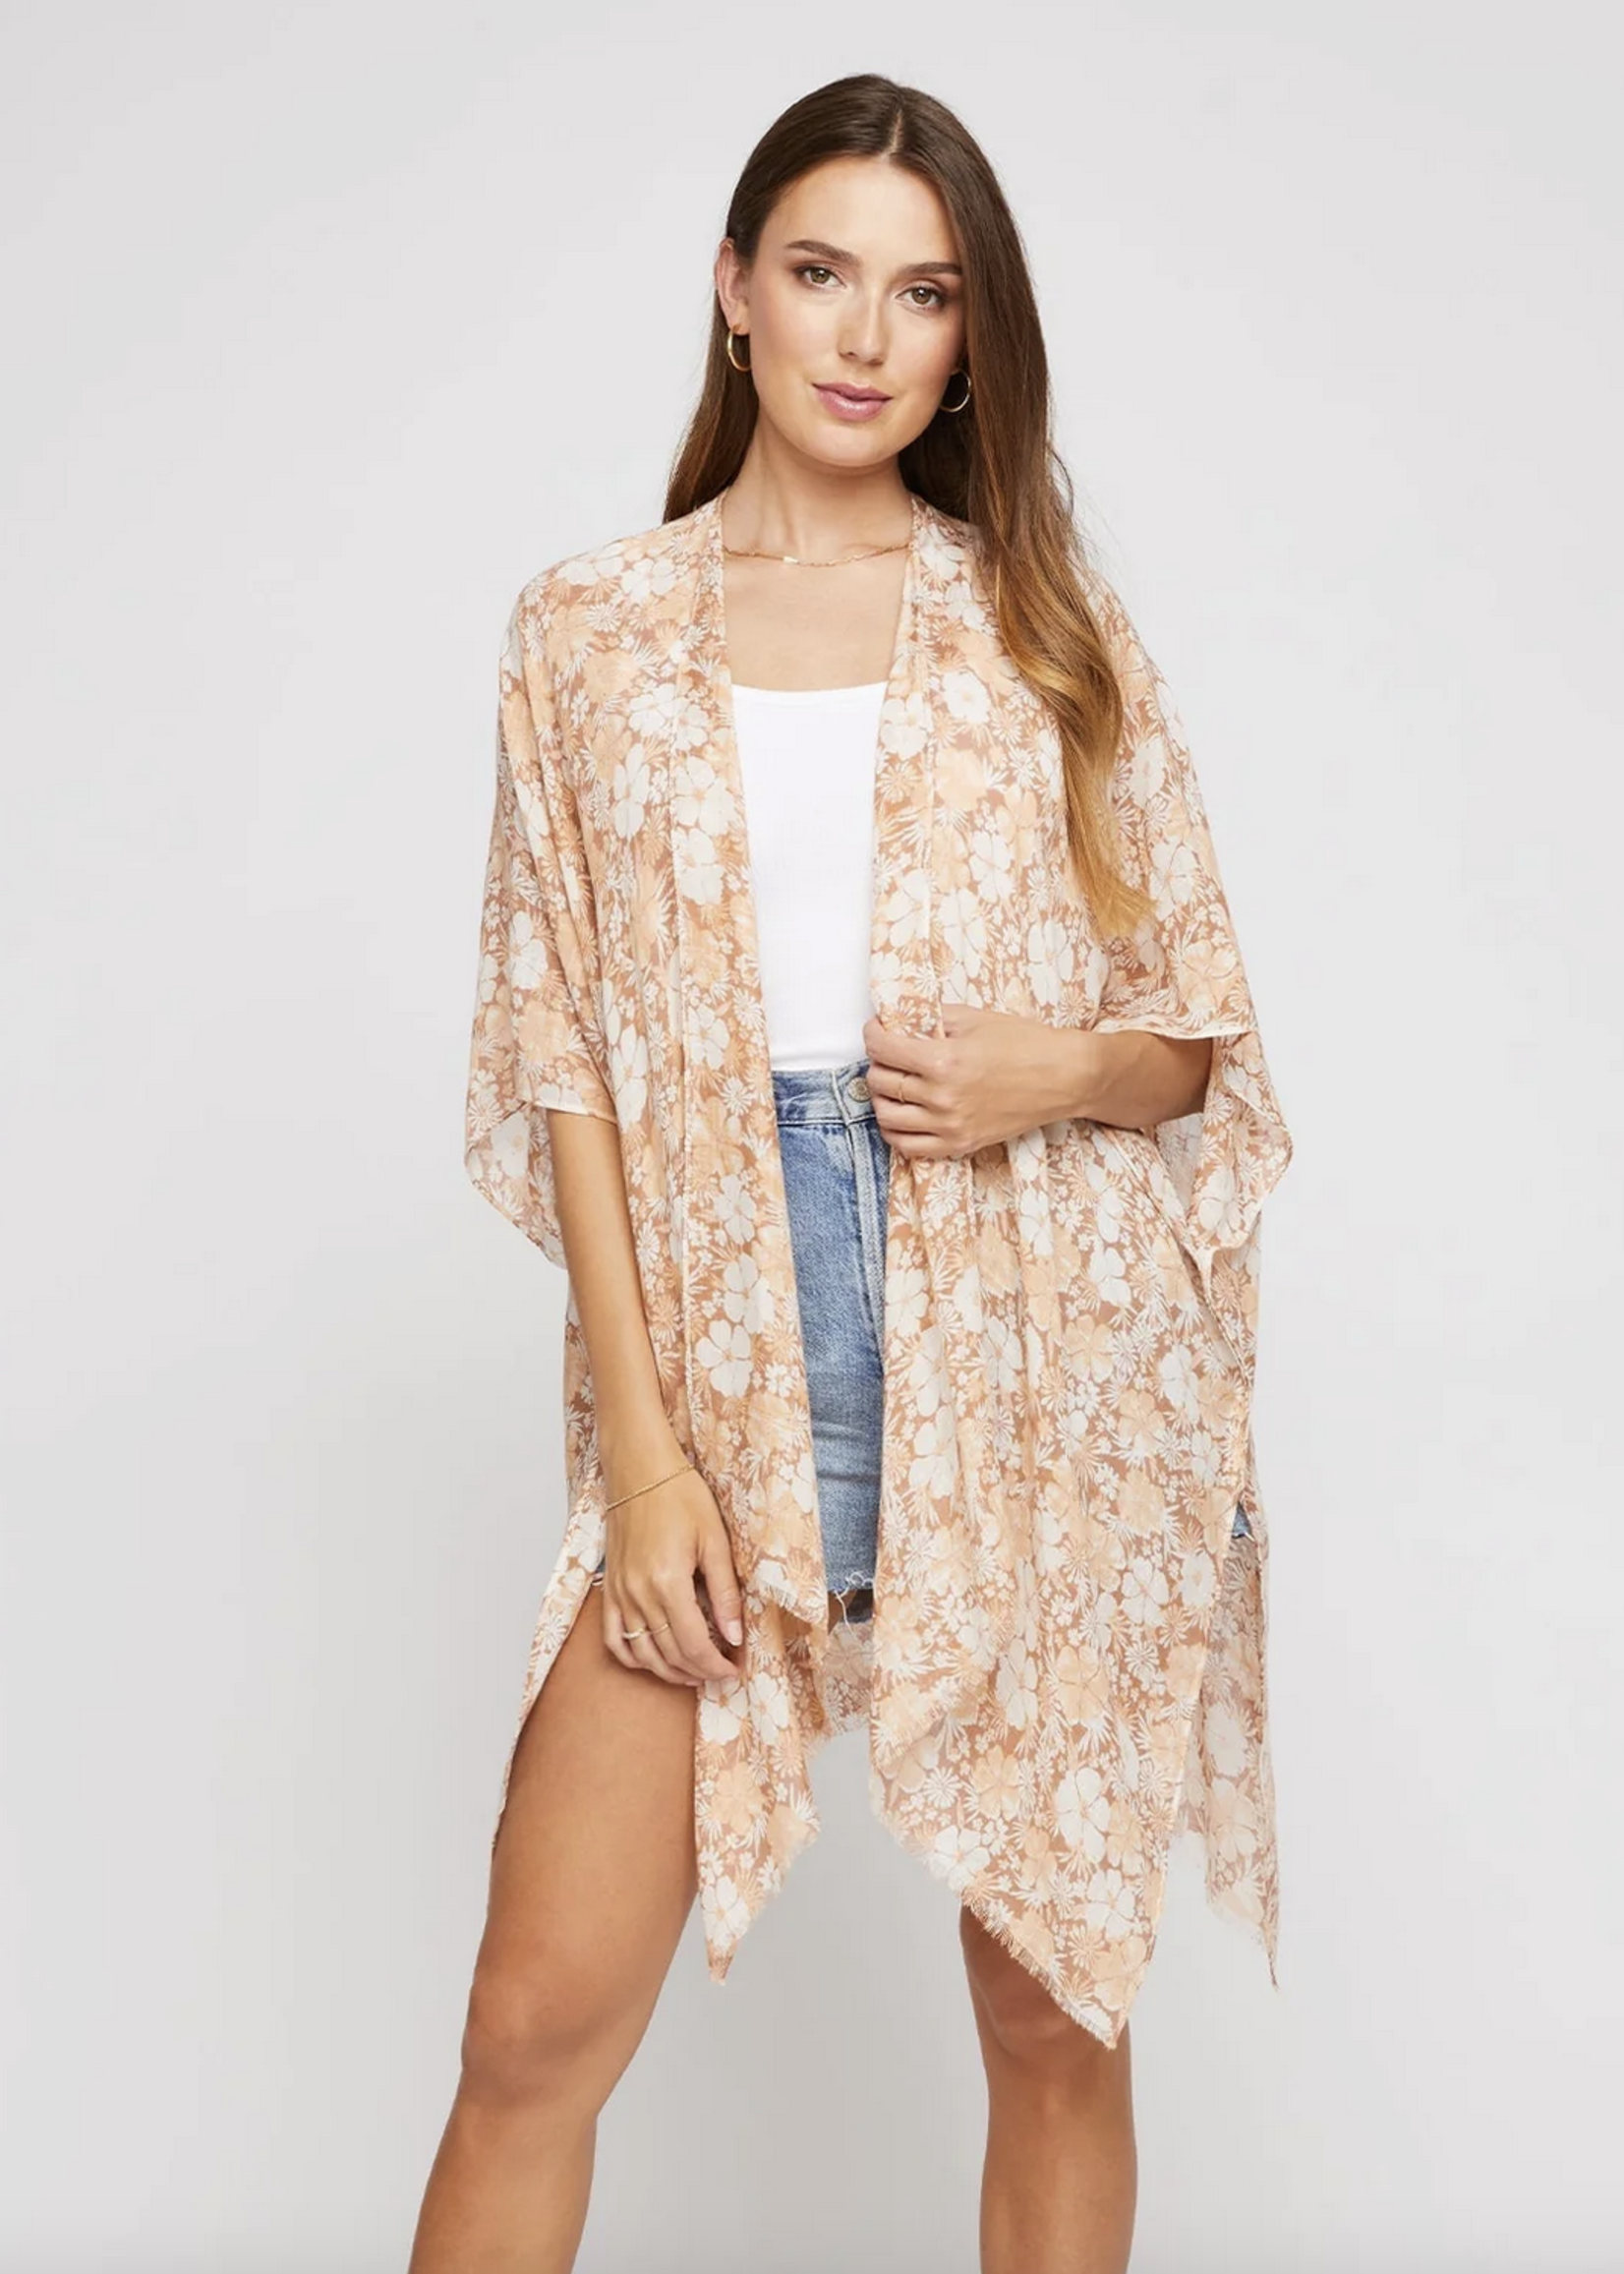 GENTLE FAWN DAWN COVER UP